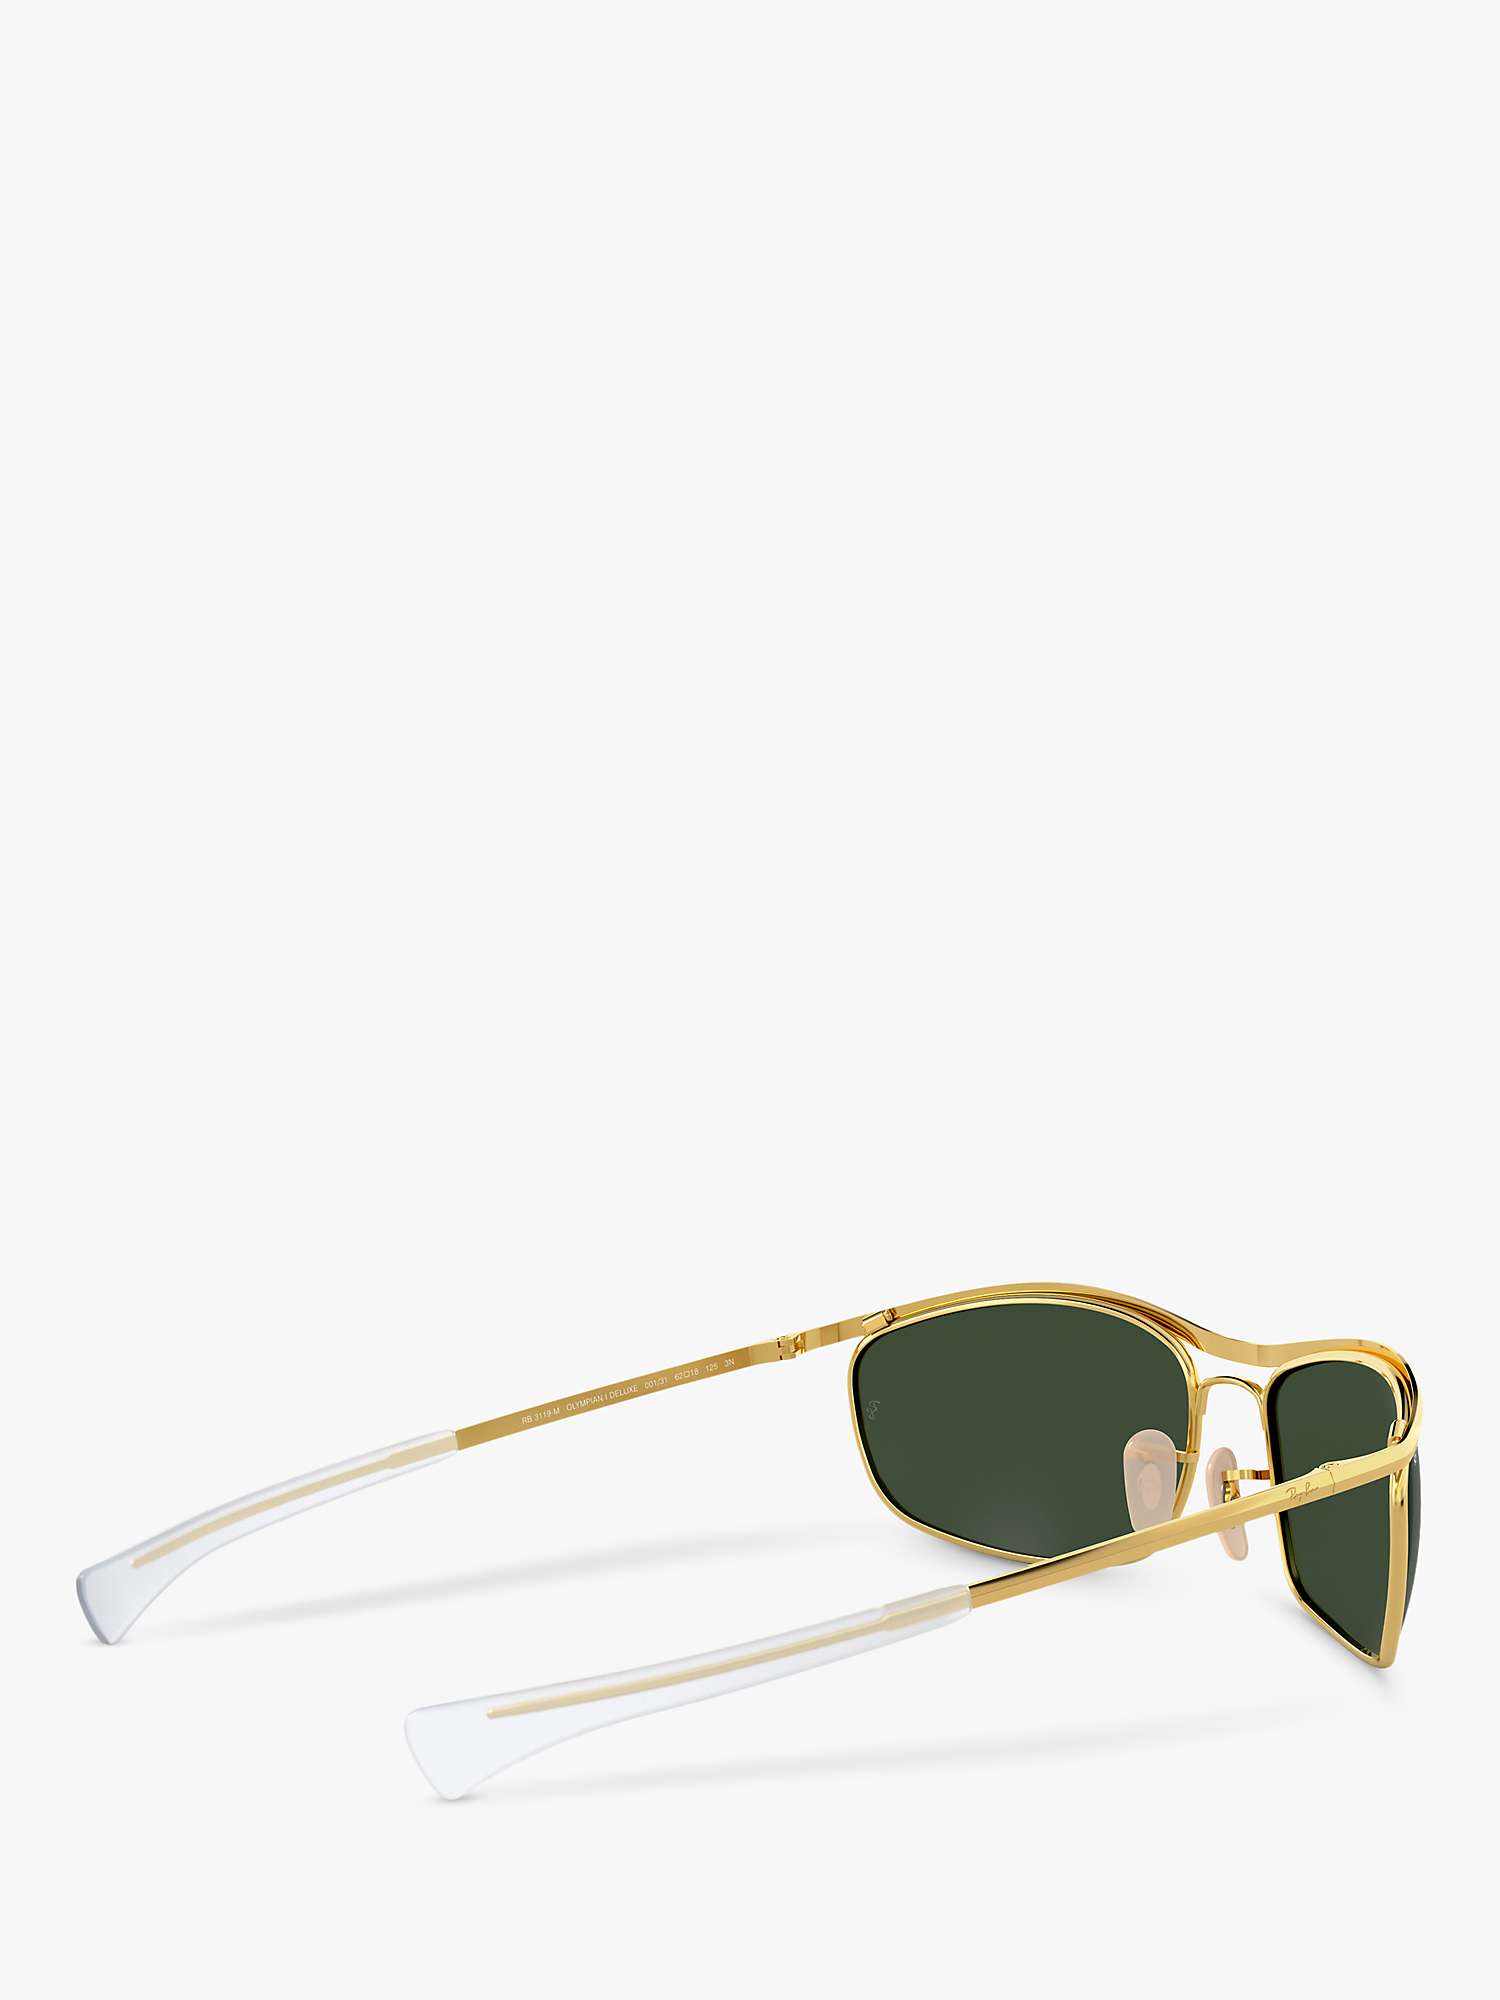 Buy Ray-Ban RB3119M Unisex Wrap Sunglasses Online at johnlewis.com